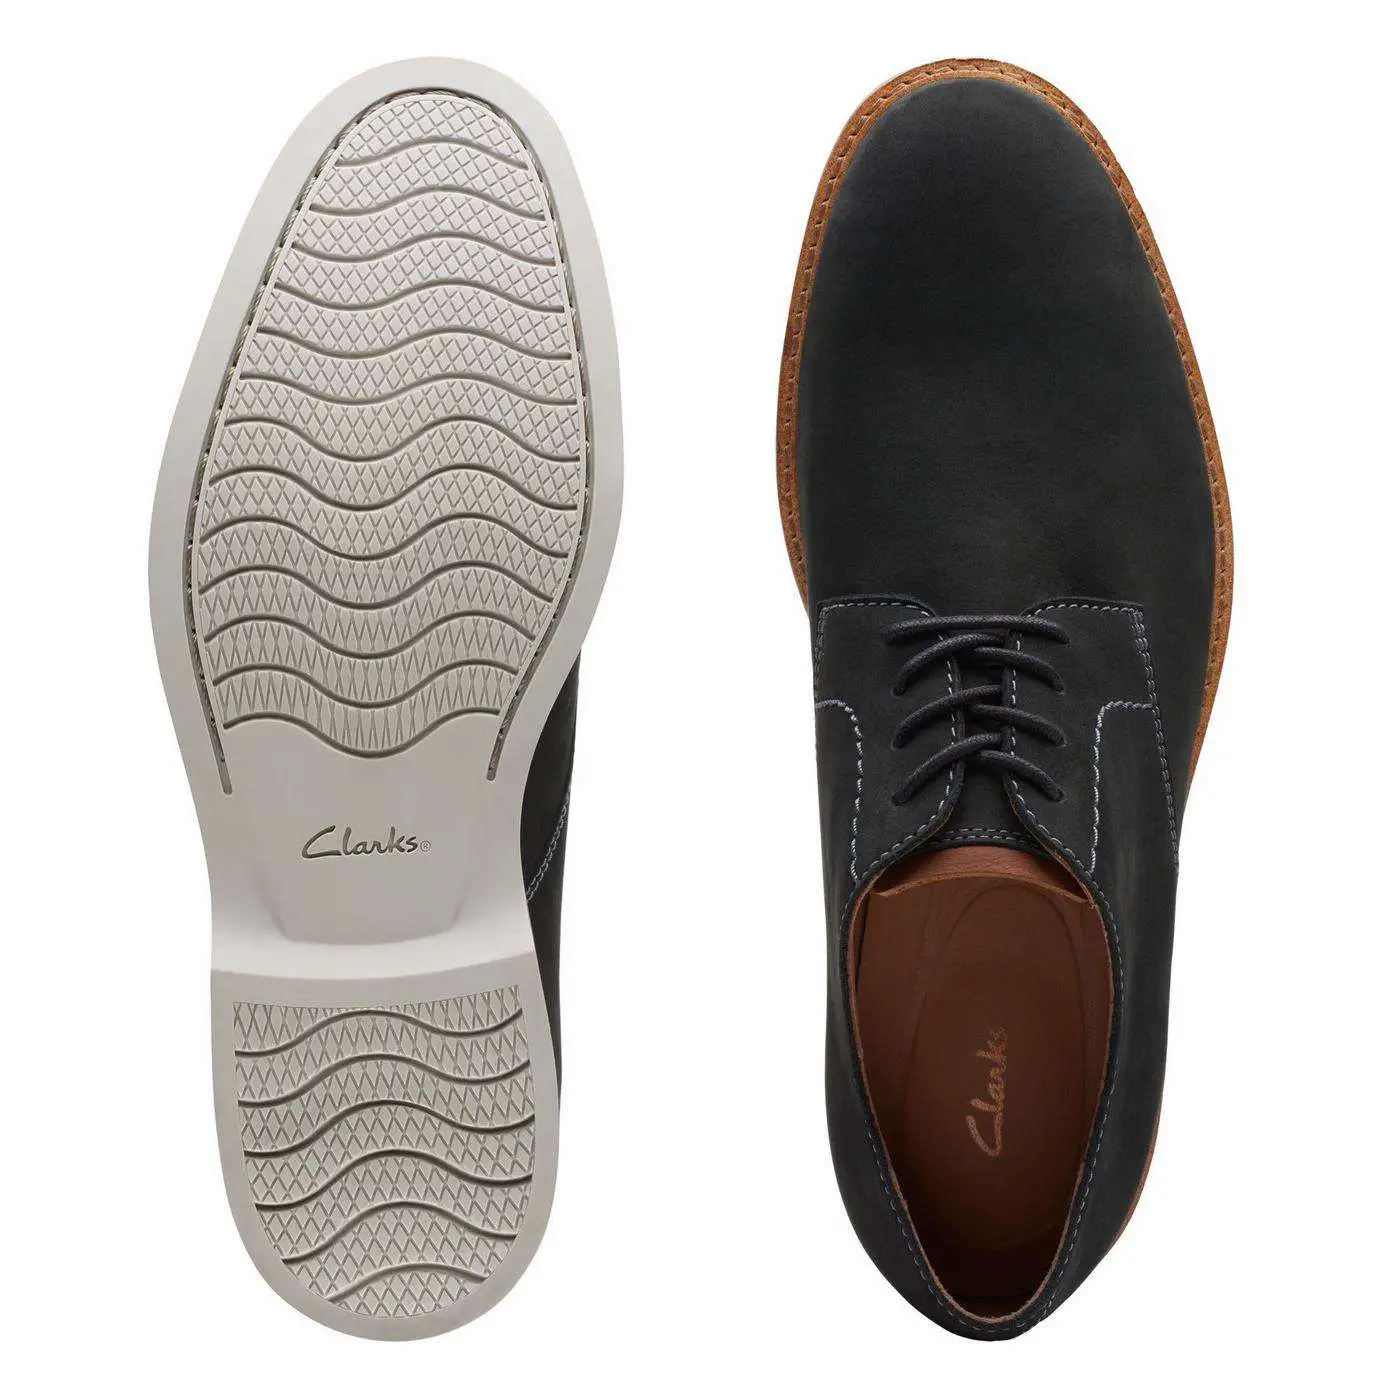 Buy Cheap Clarks Shoes Online